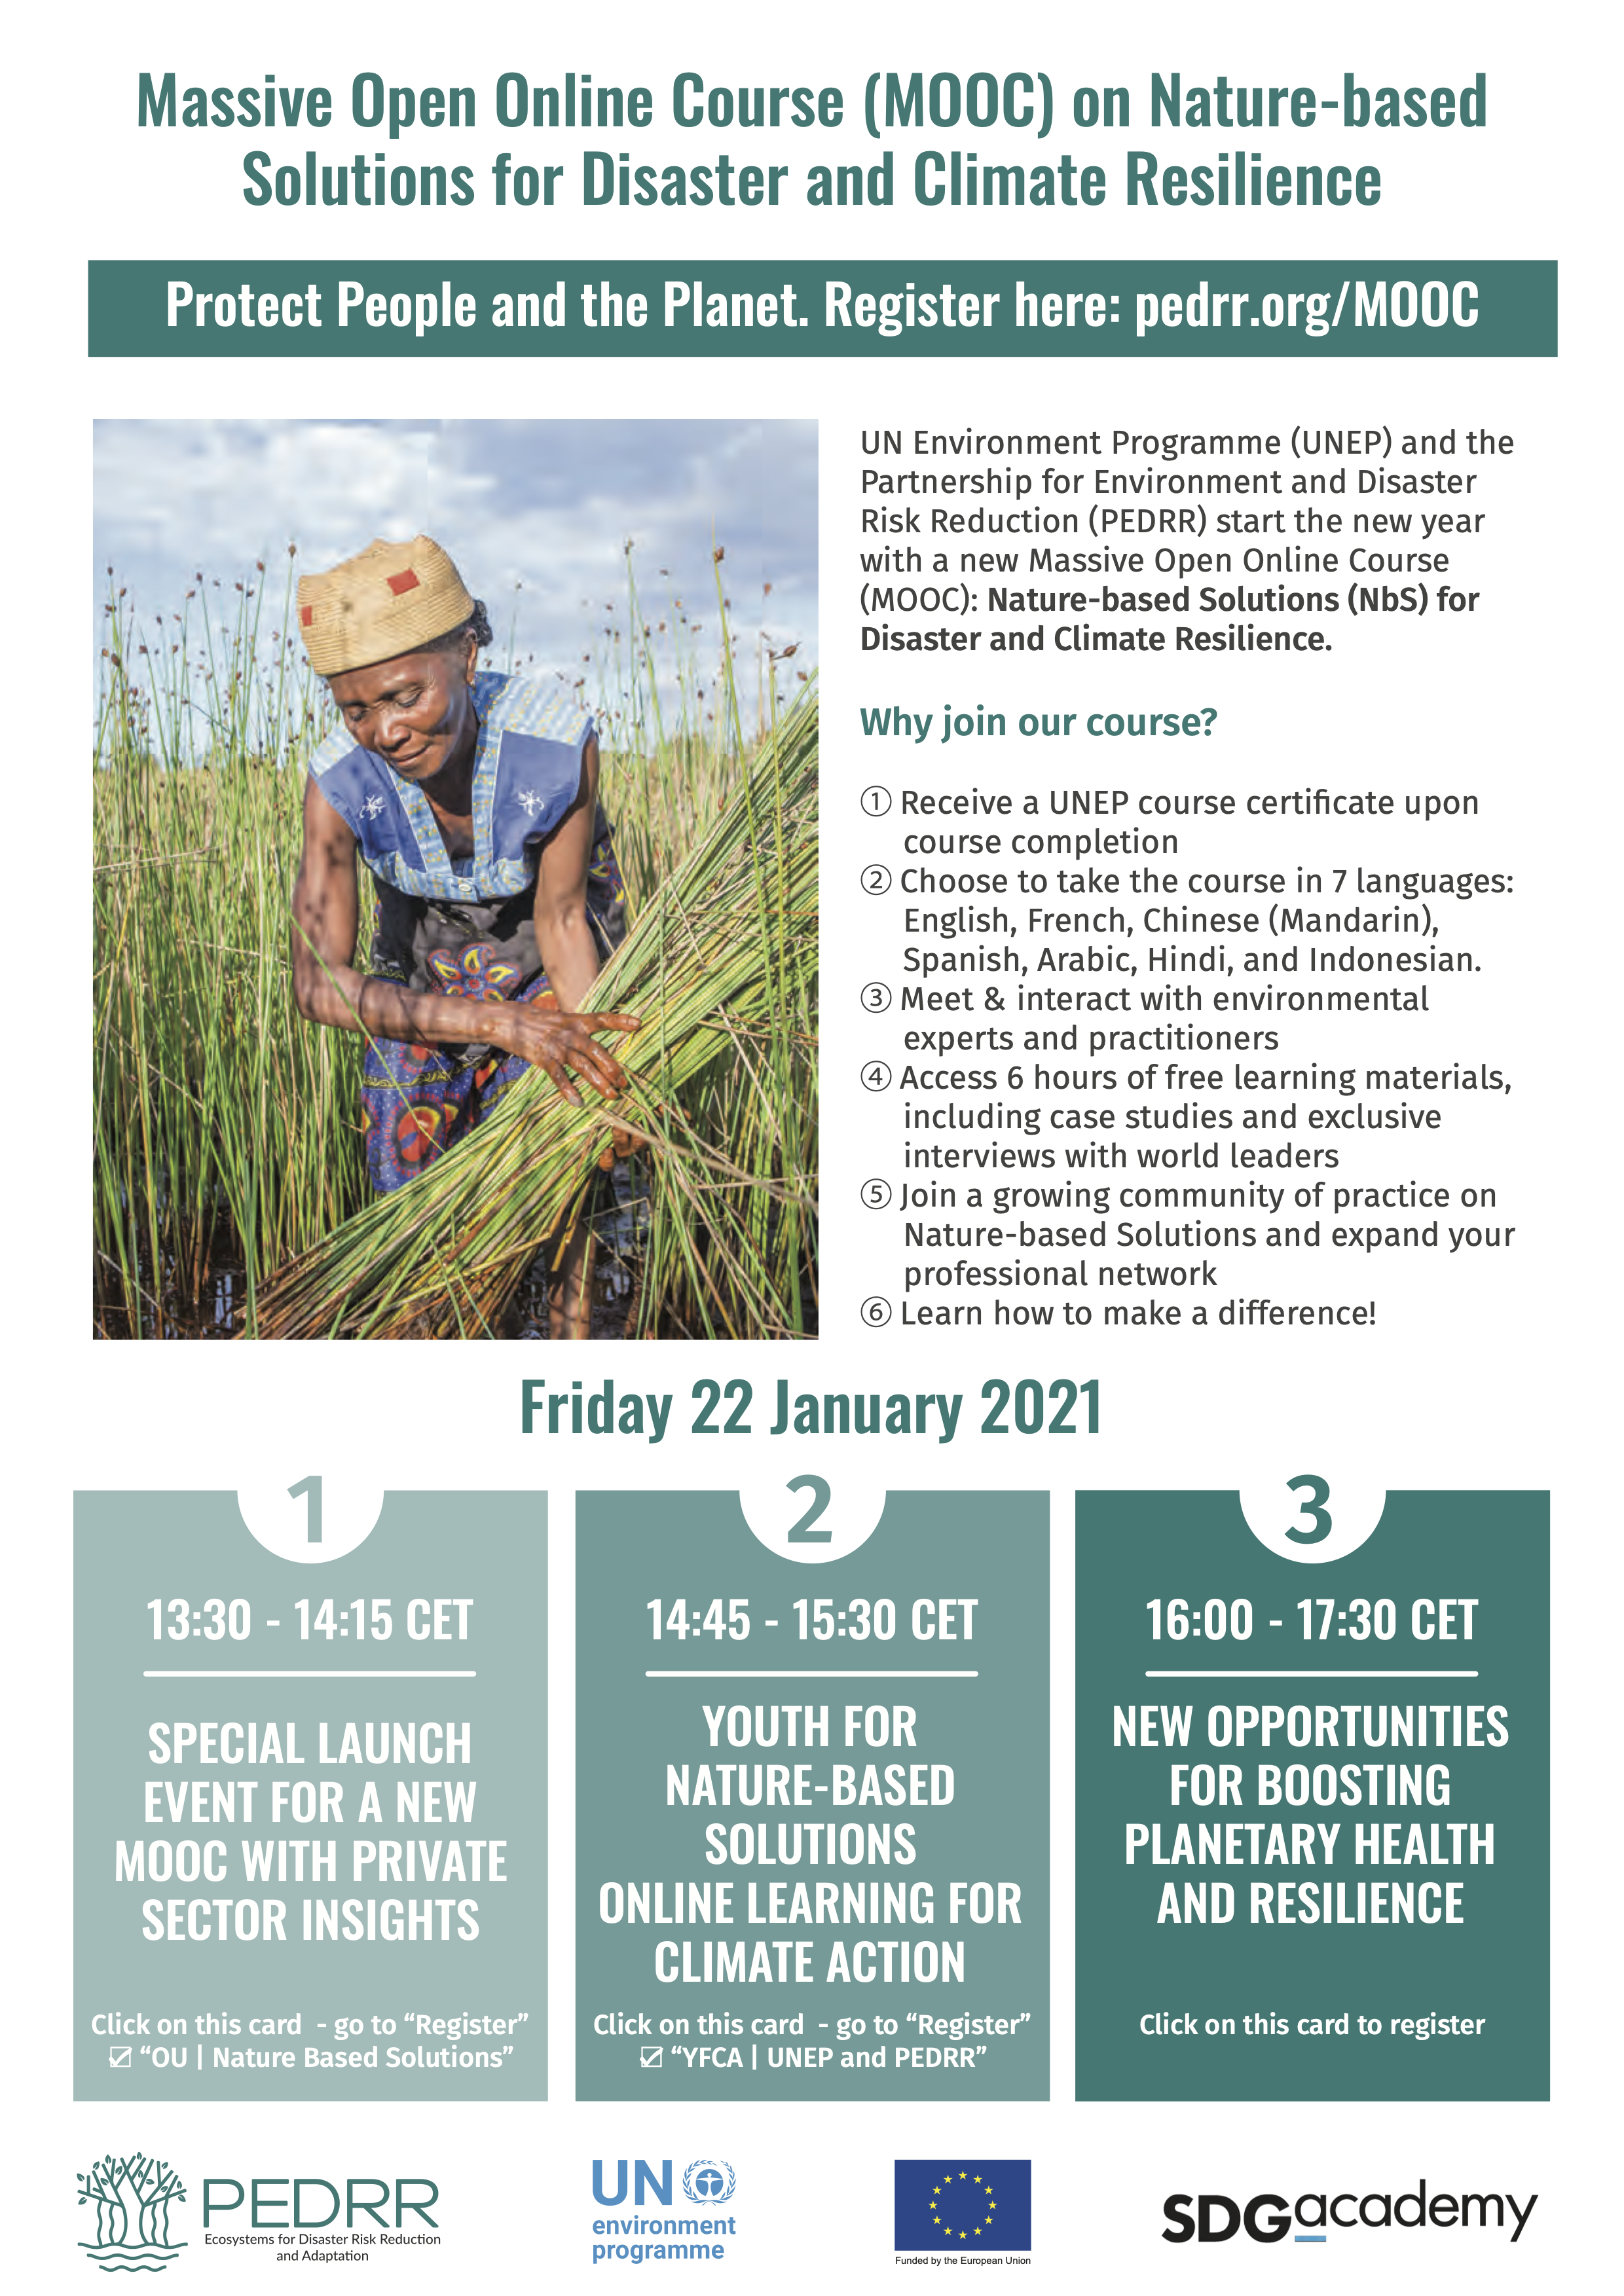 Launch of a new MOOC on Nature-based solutions for disaster and climate resilience on Friday 22 January